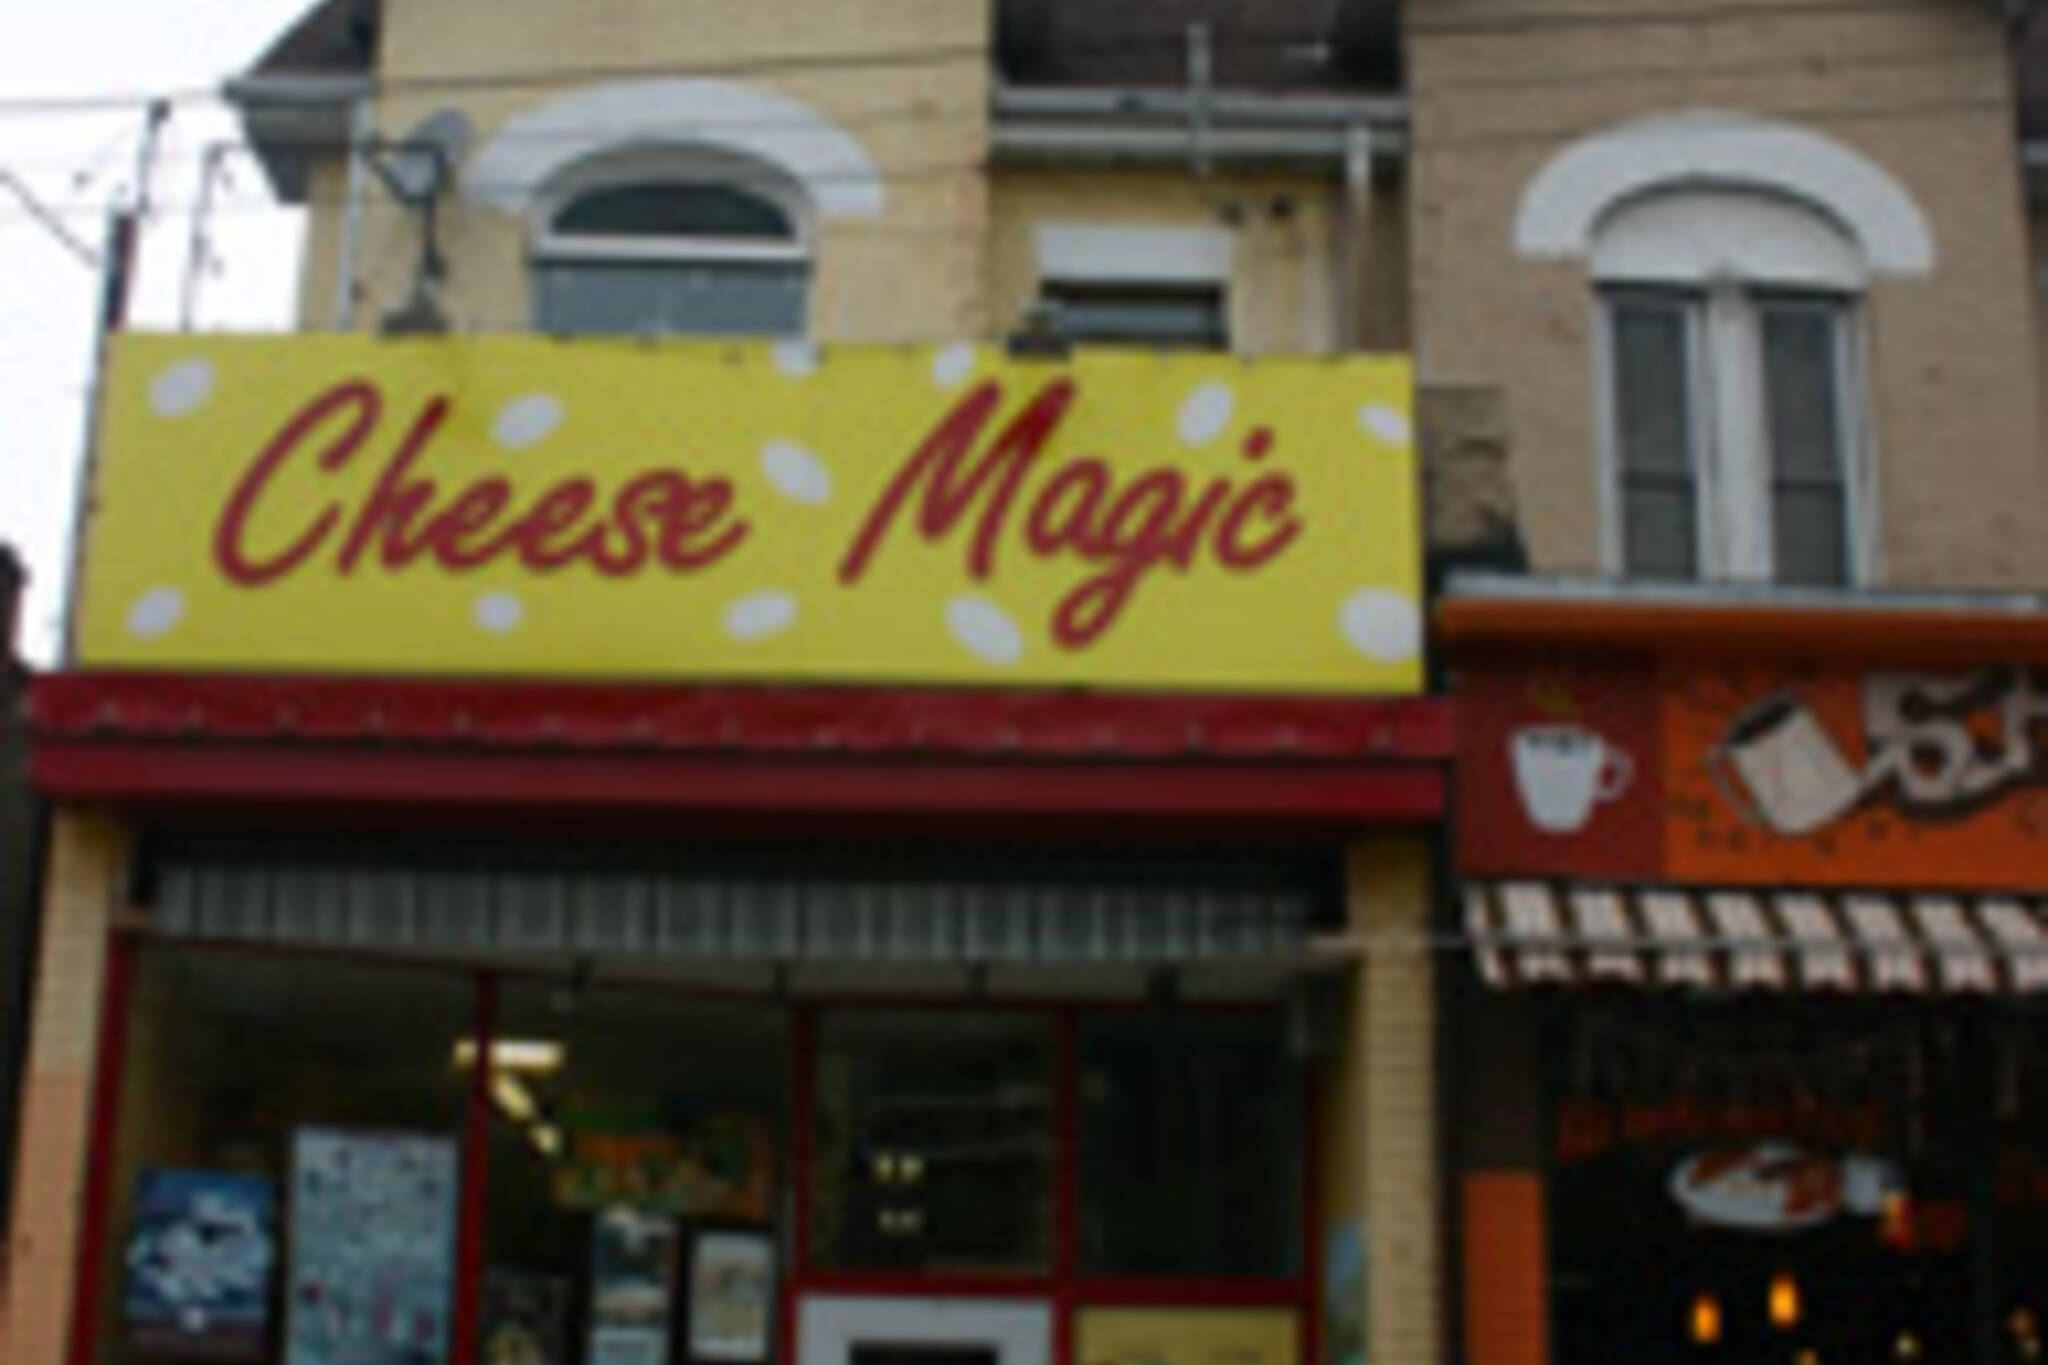 Cheese Magic itself.  There are rumours that the Cheese Magic Boys, much like Oompa Loompas, actually live there.